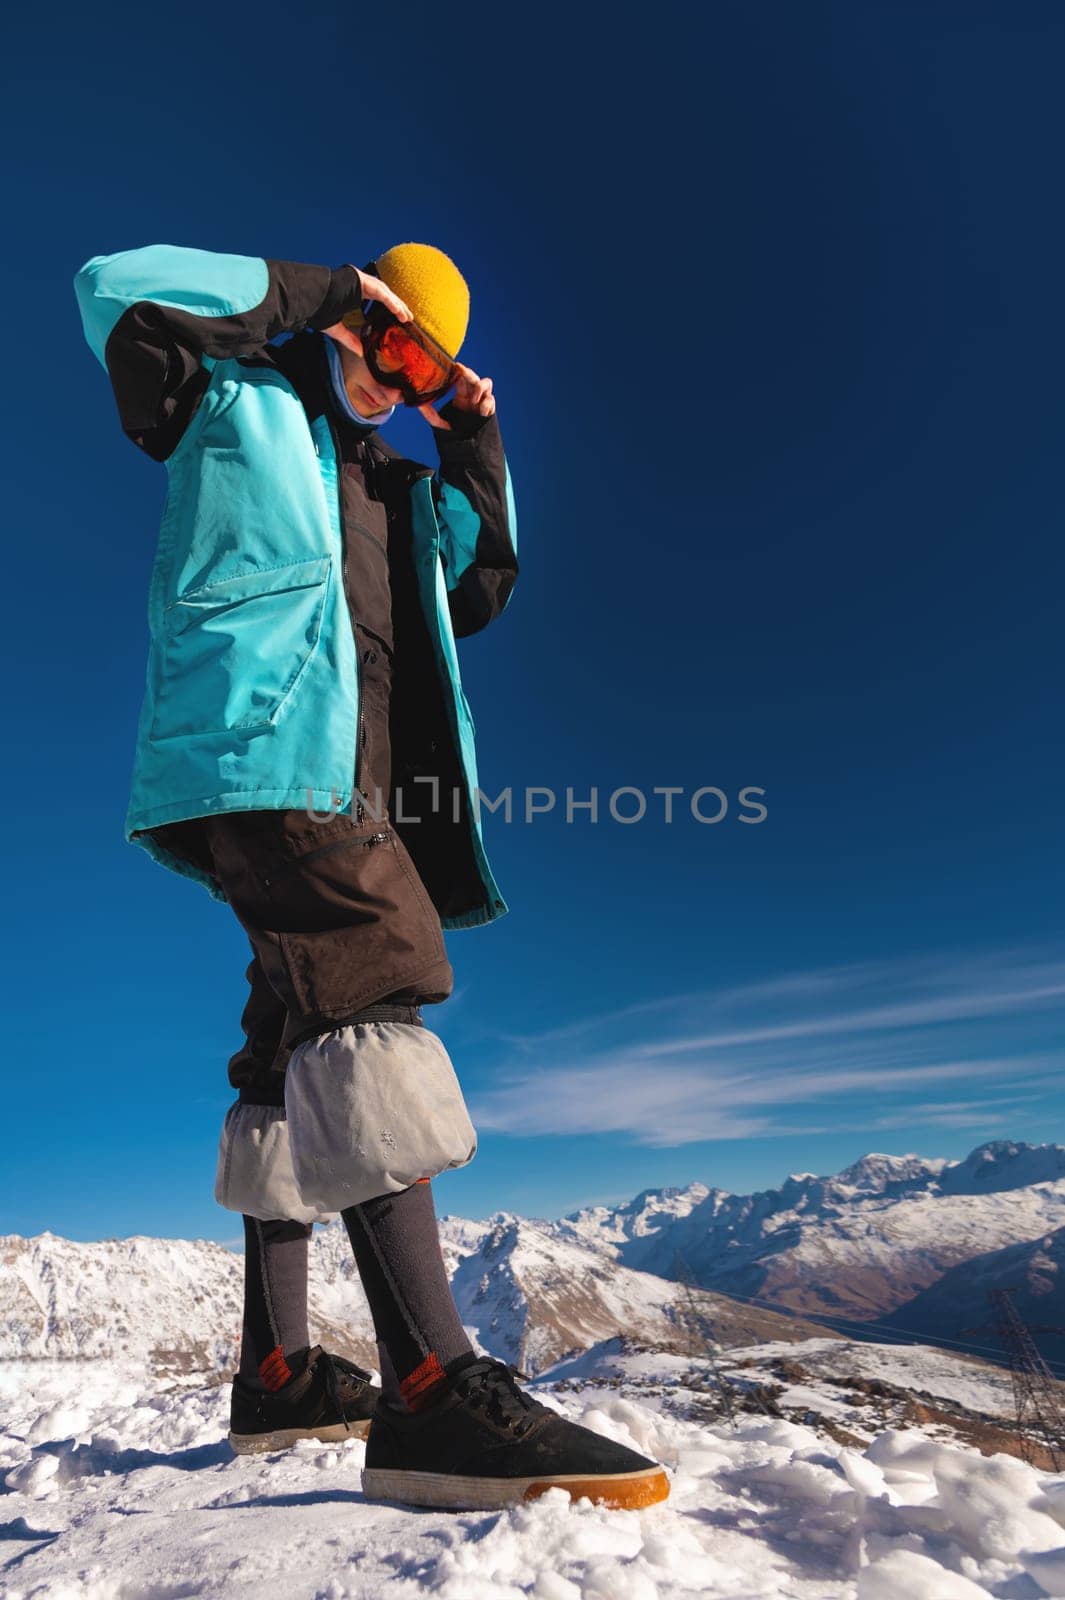 A stylish fashionable skier in a hat and sneakers adjusts his ski goggles against a background of mountains. Vertical frame with copy space.